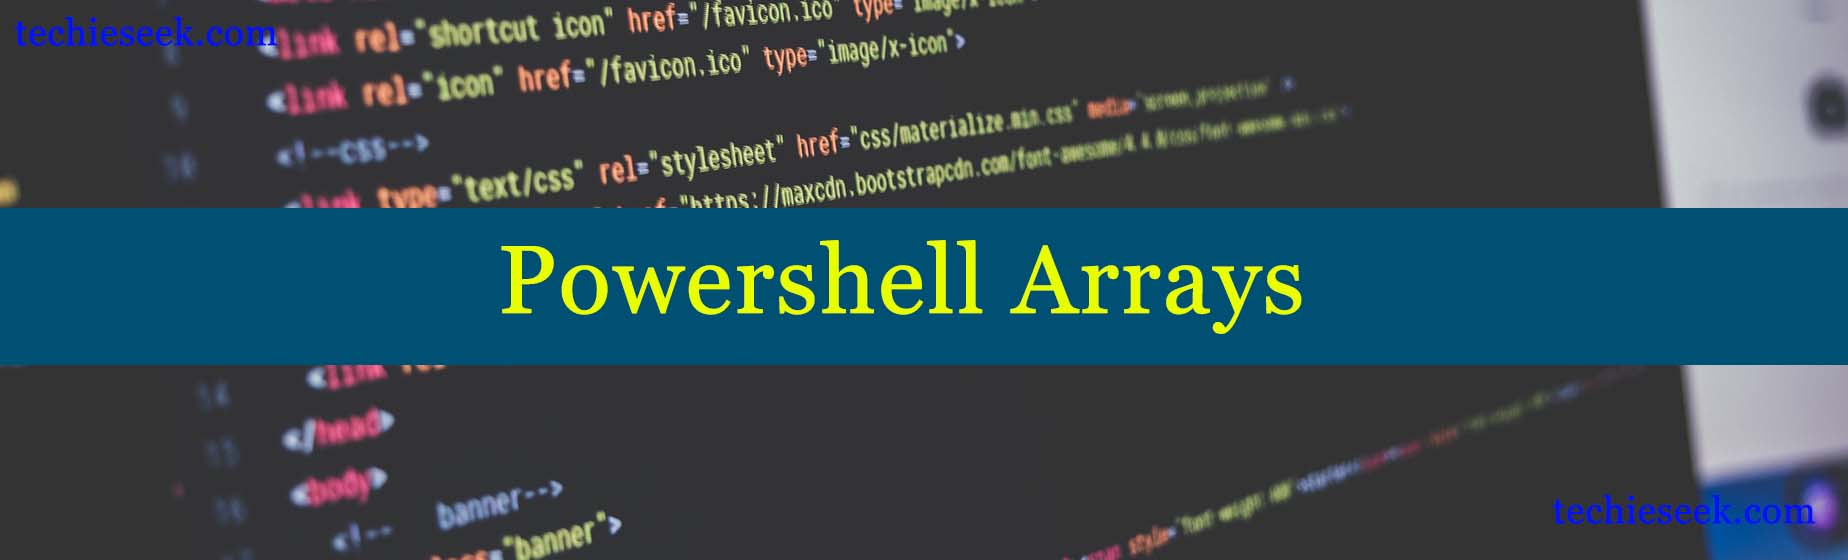 Powershell Arrays Learn Powershell In 30 Minutes 9730